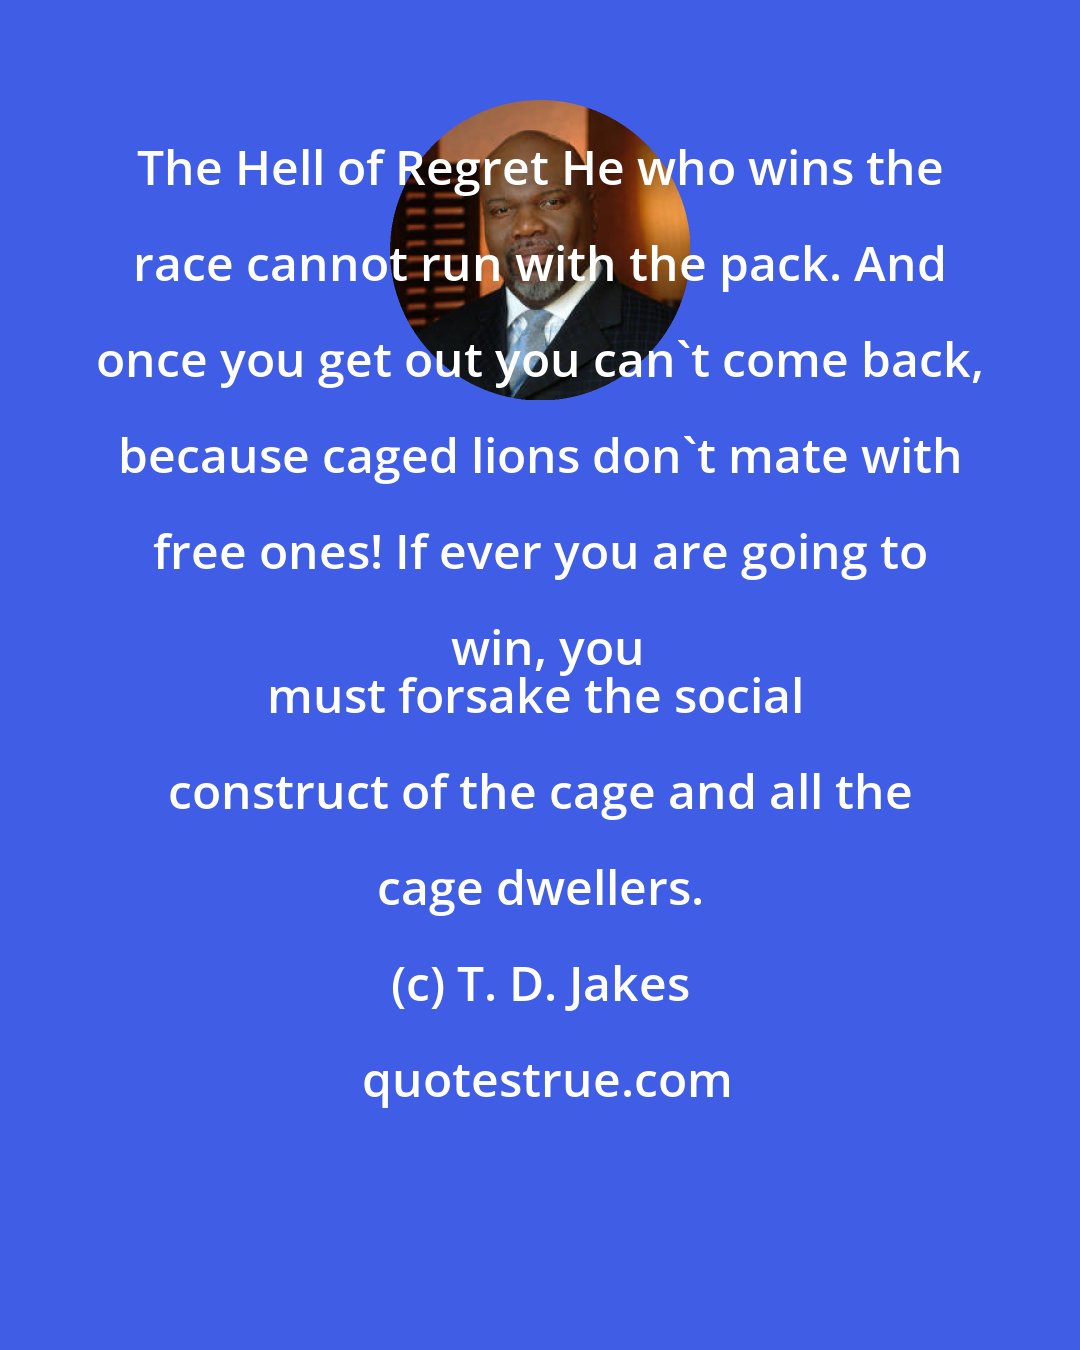 T. D. Jakes: The Hell of Regret He who wins the race cannot run with the pack. And once you get out you can't come back, because caged lions don't mate with free ones! If ever you are going to win, you
must forsake the social construct of the cage and all the cage dwellers.